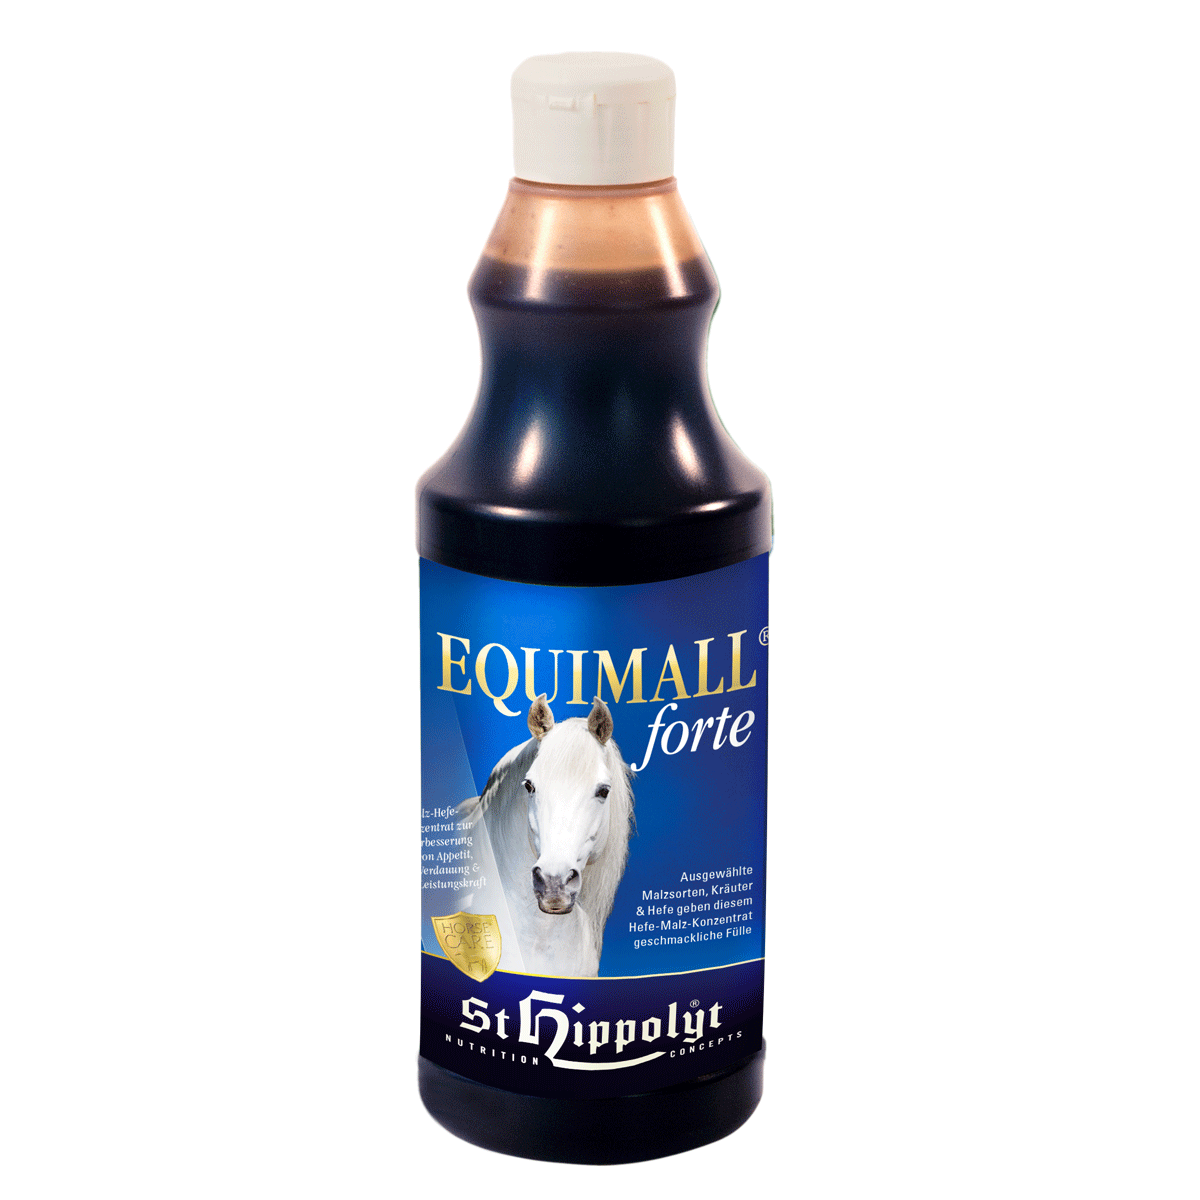 EquiMall forte 0,5l